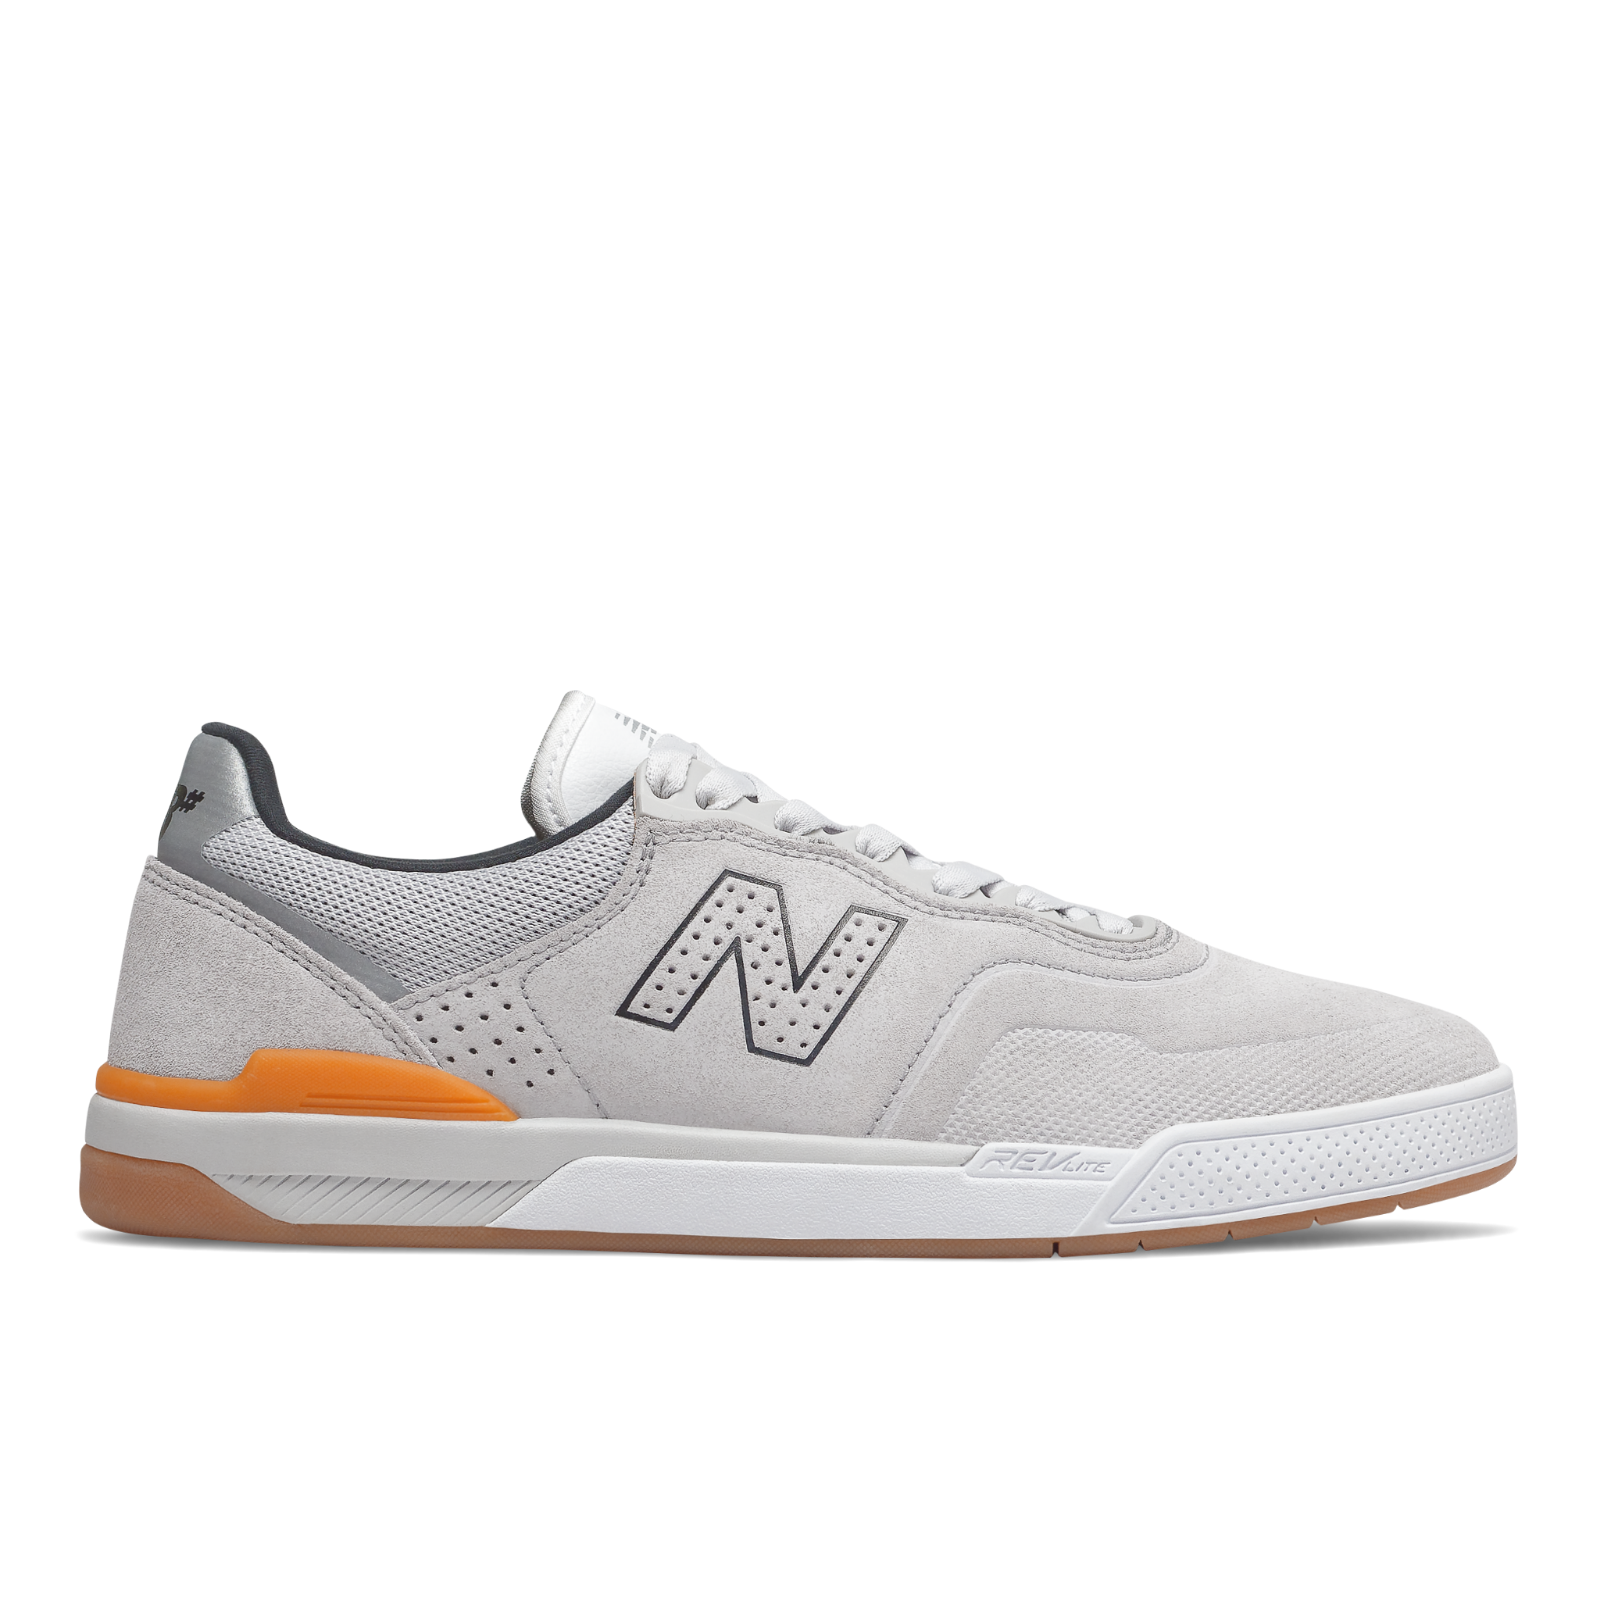 New Balance Zoom Shoe 1 Customer Review And 15 Listings